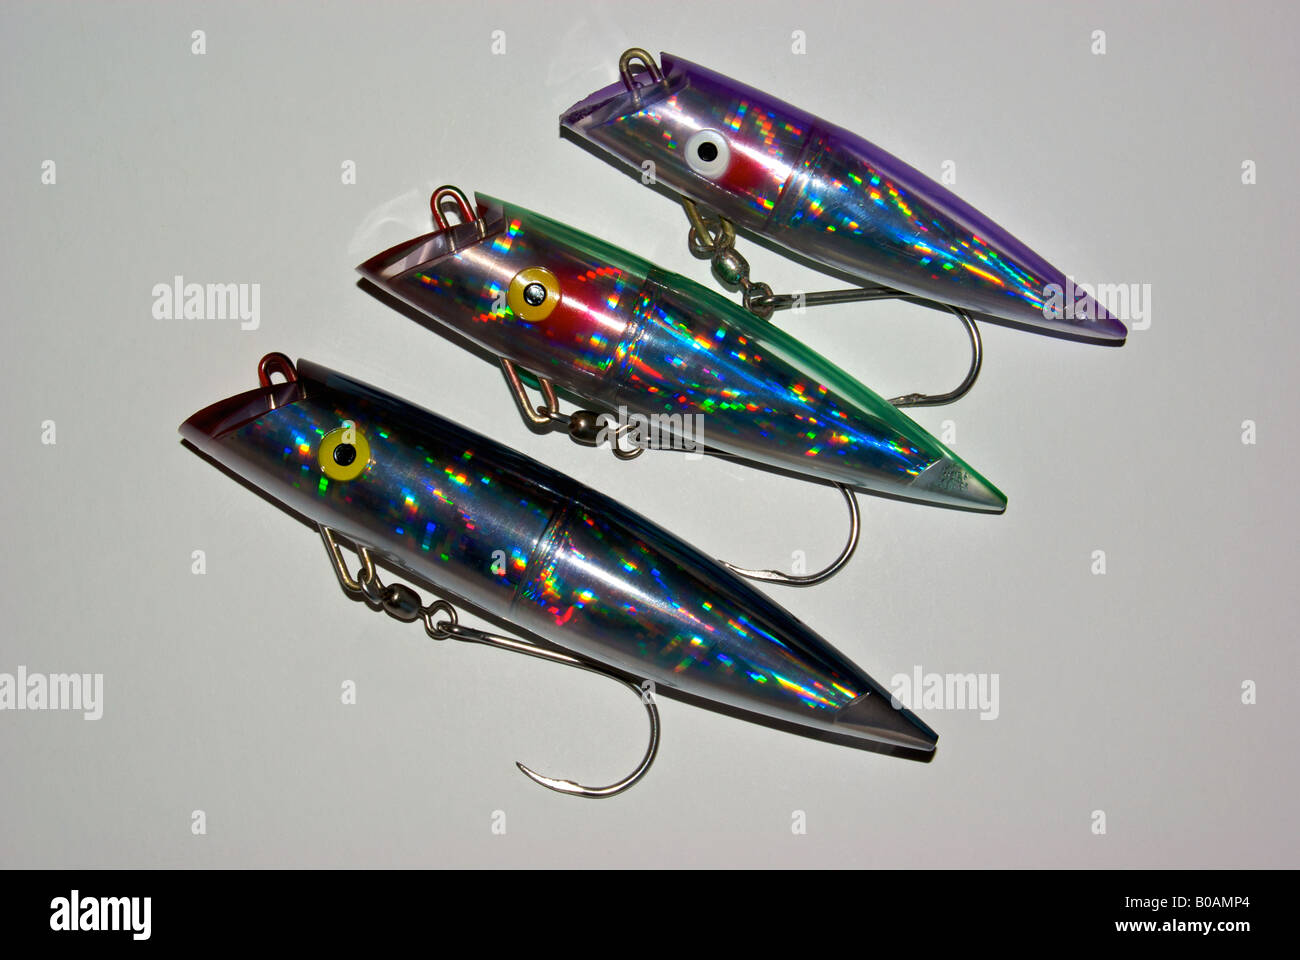 Large Tomic Plaid Series trolling plug fishing lure will attract